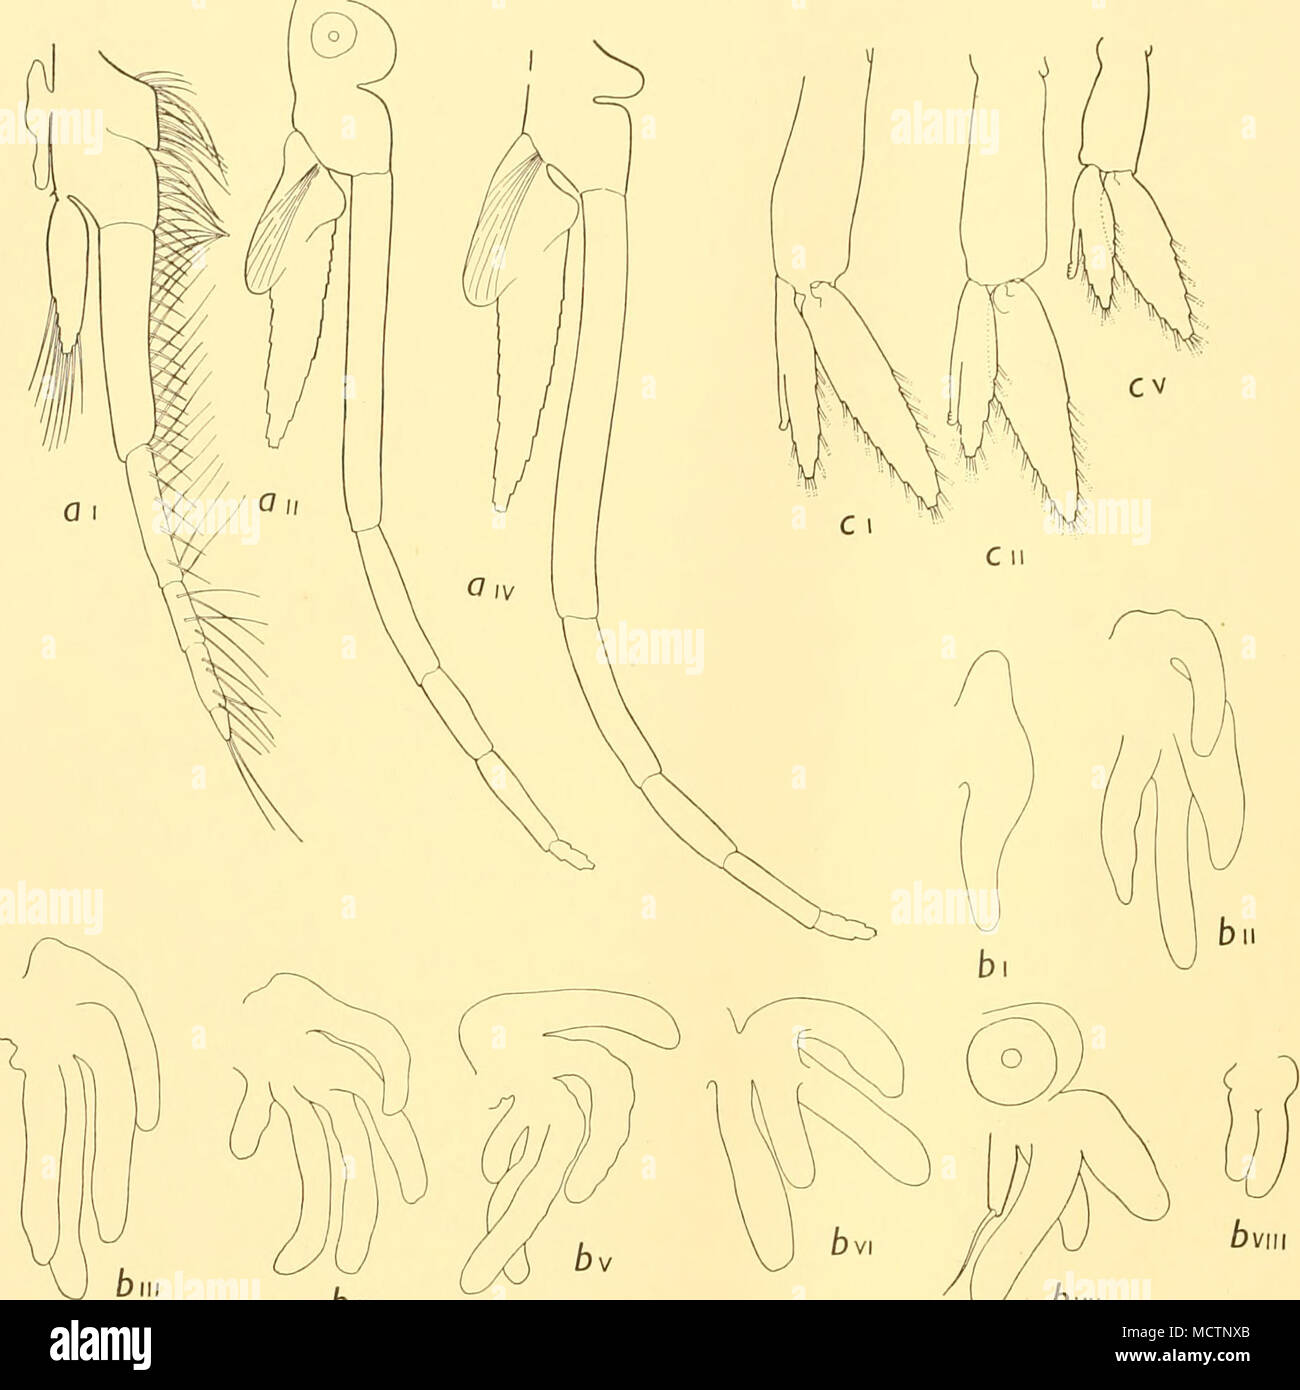 . a i, aVi, a iv, thoracic limbs I, II and IV ( x 32); b i-b viii, gills ( x 83), Th. VII shown with gill. biv ^^ vy Dvii Fig. 24. Fifth Furcilia (continued). c, c ii, c V, pleopods I, II and V ( x 35). SIXTH FURCILIA The frequency of occurrence and average lengths of larvae belonging to this stage are stated in Table XXXVII. The rostrum (Fig. 25 a, c) is much more acutely pointed than in the previous stage. The lateral denticle is conspicuous, and the emargination of the posterior border of the carapace is as shown in Fig. 25 a. The telson length is more than six times the width at the inser Stock Photo